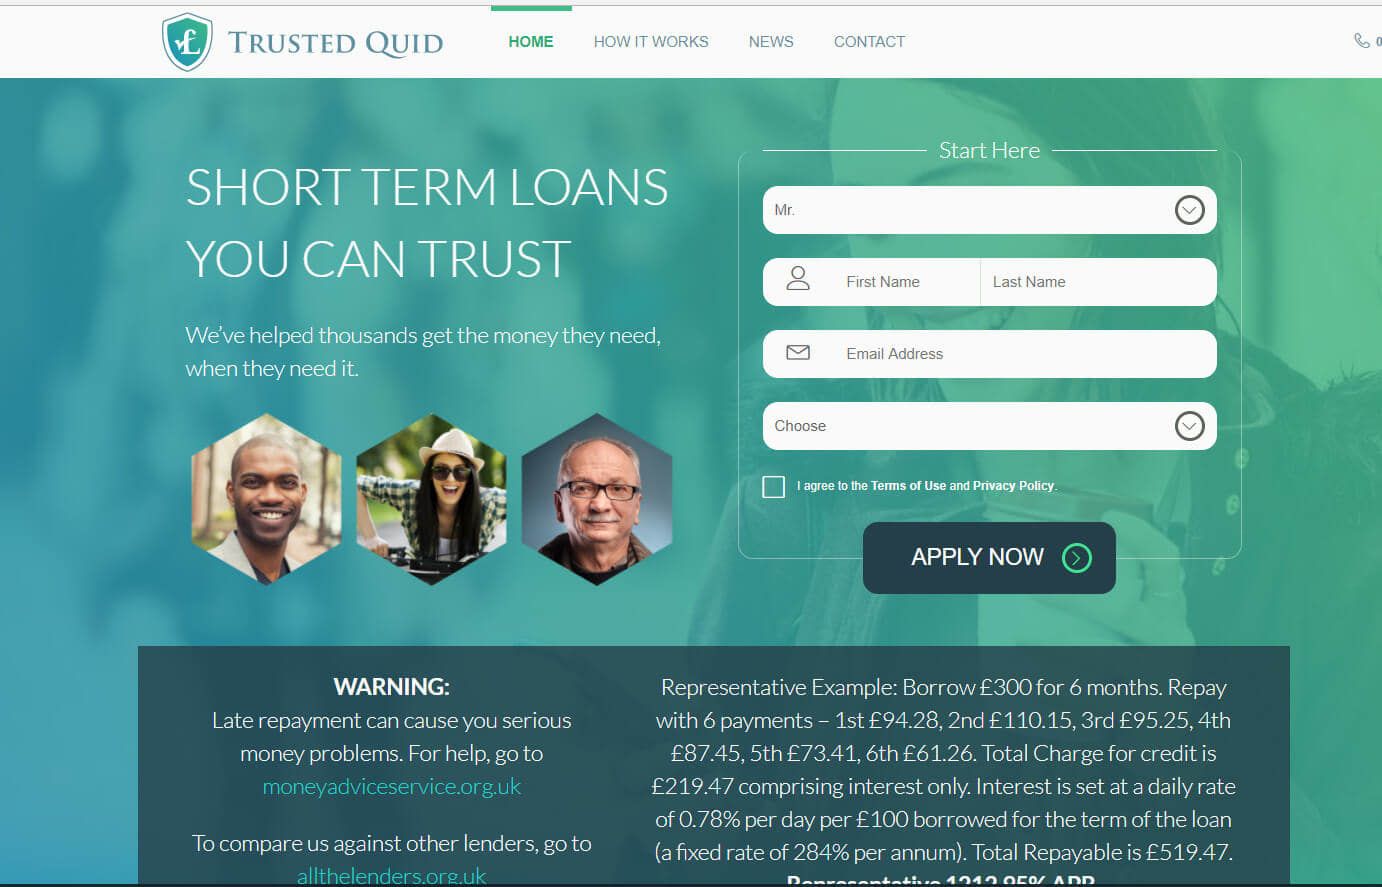 Who are Trusted Quid?